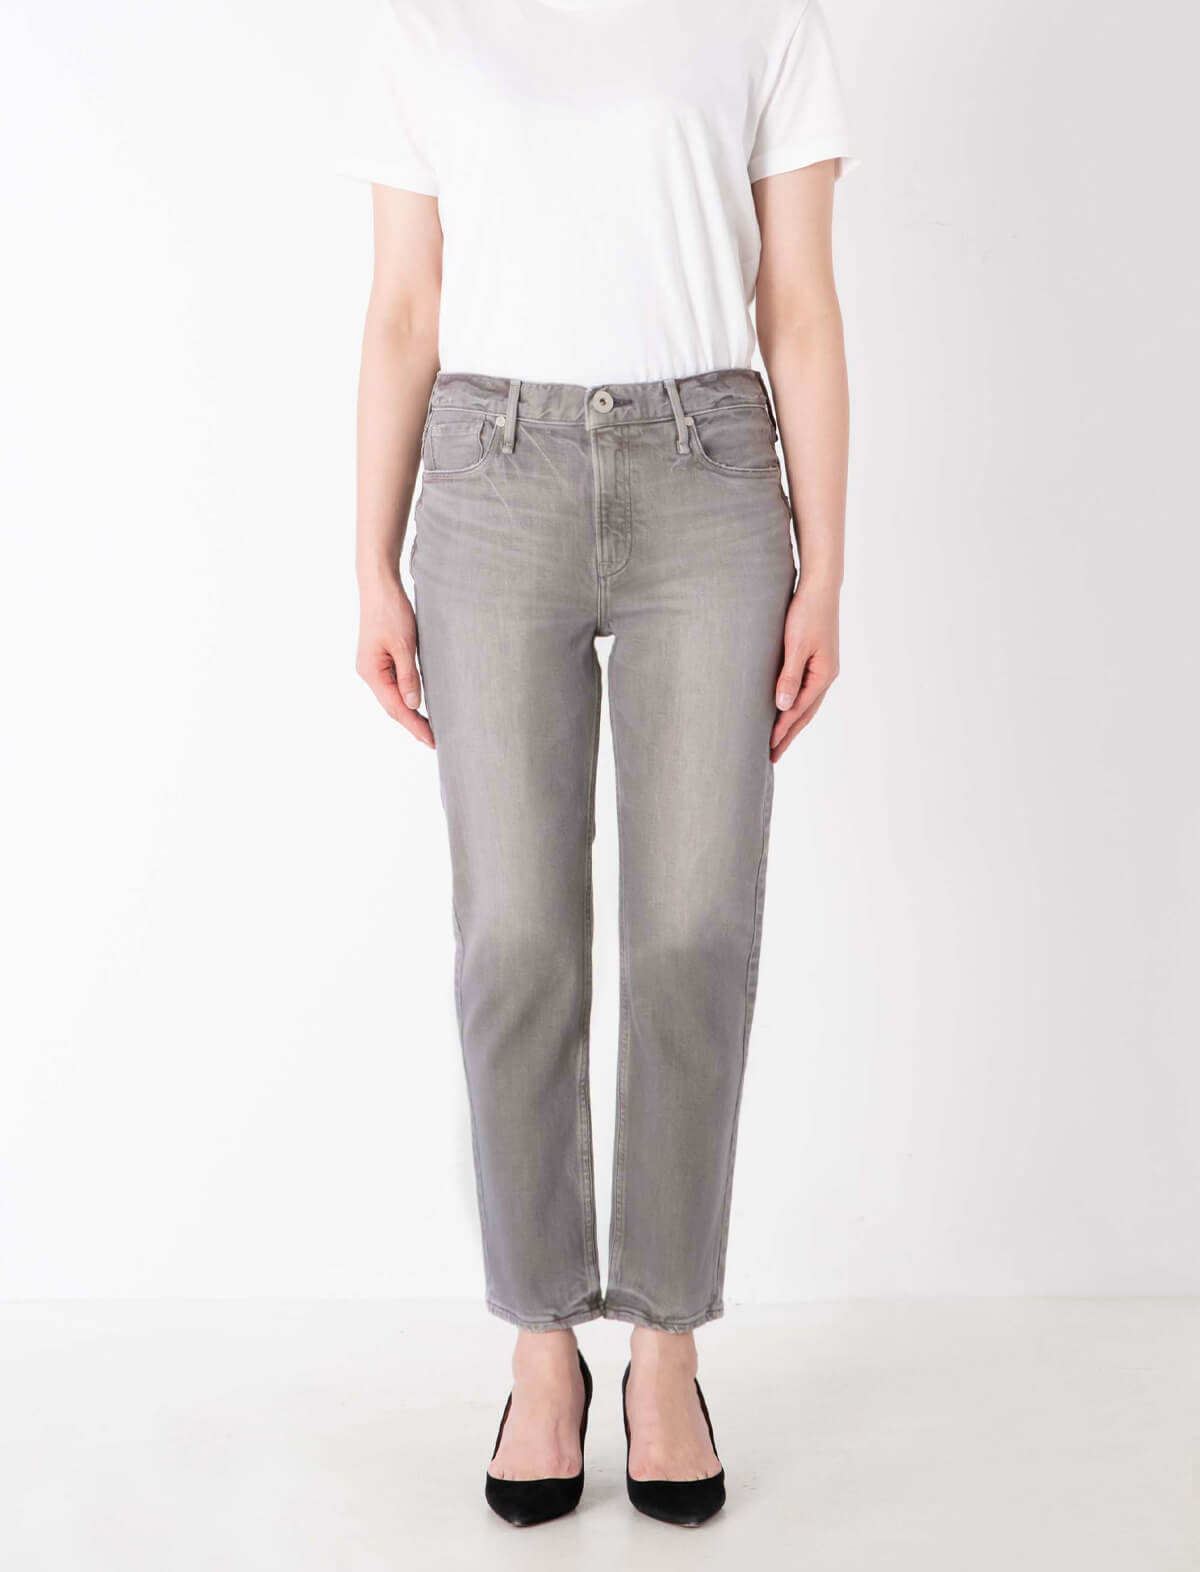 UPPER HIGHTS The Ninety's Midrise Tapered Jeans In Etain